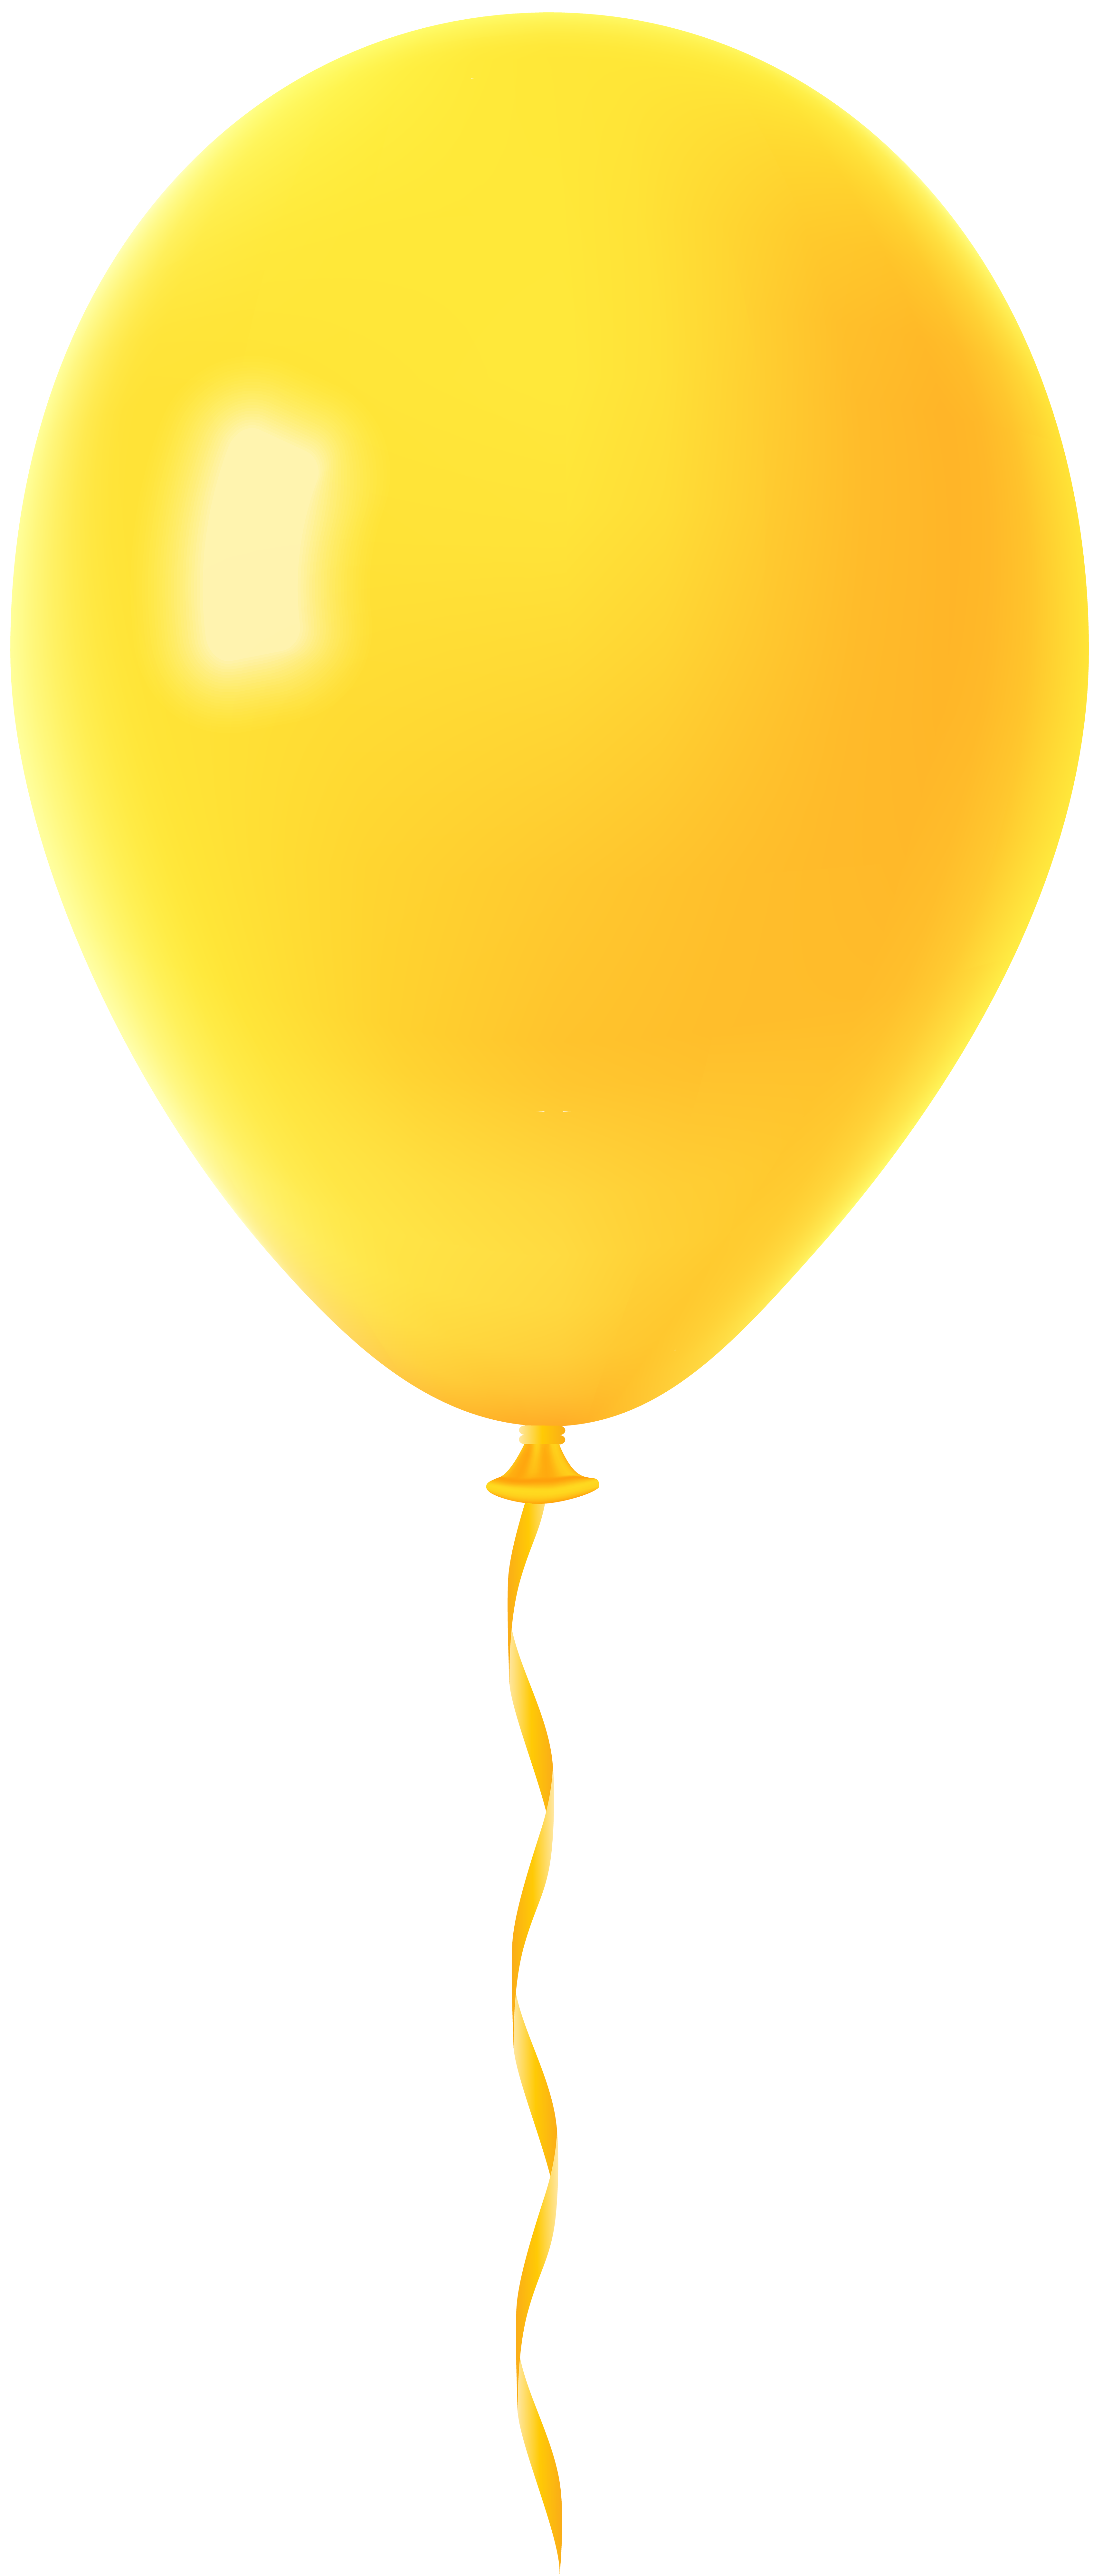 Yellow Balloon Transparent Png Clip Art Image Gallery Yopriceville High Quality Images And Transparent Png Free Clipart